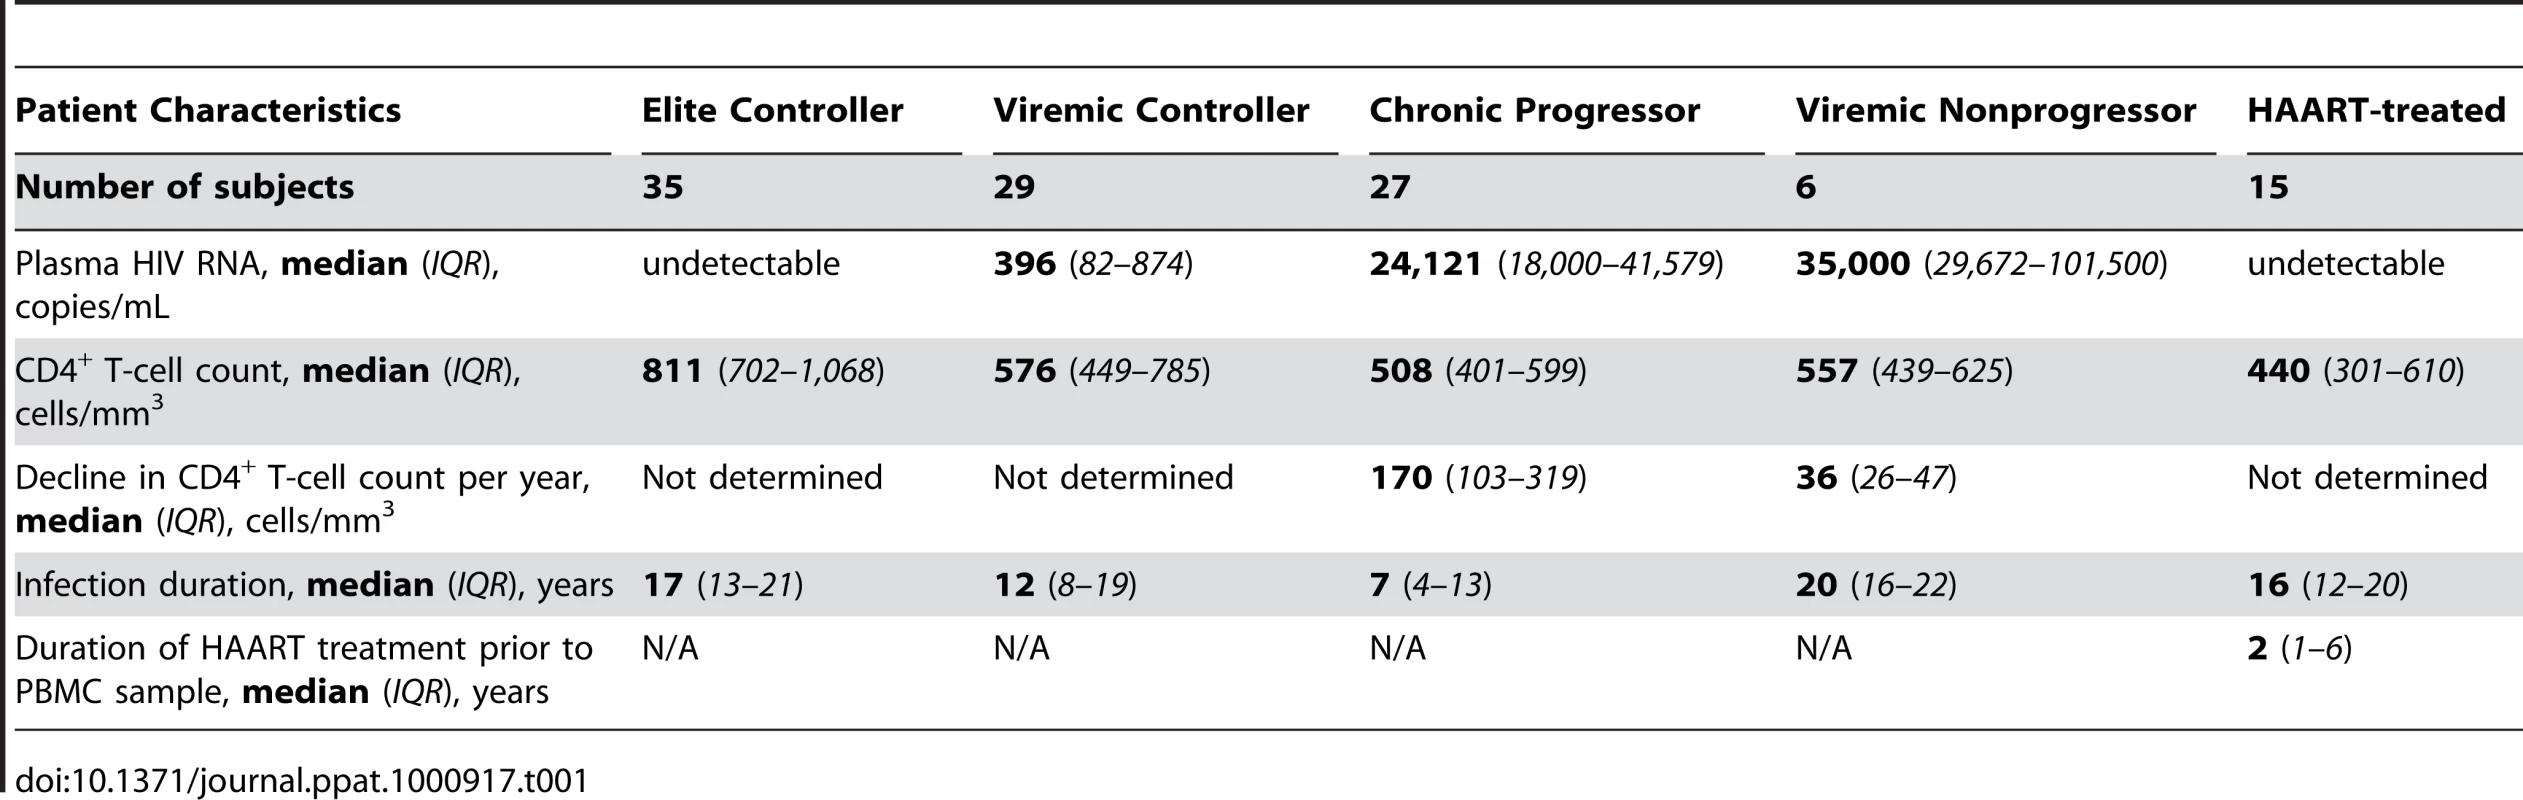 Clinical parameters of HIV infected subject cohorts.